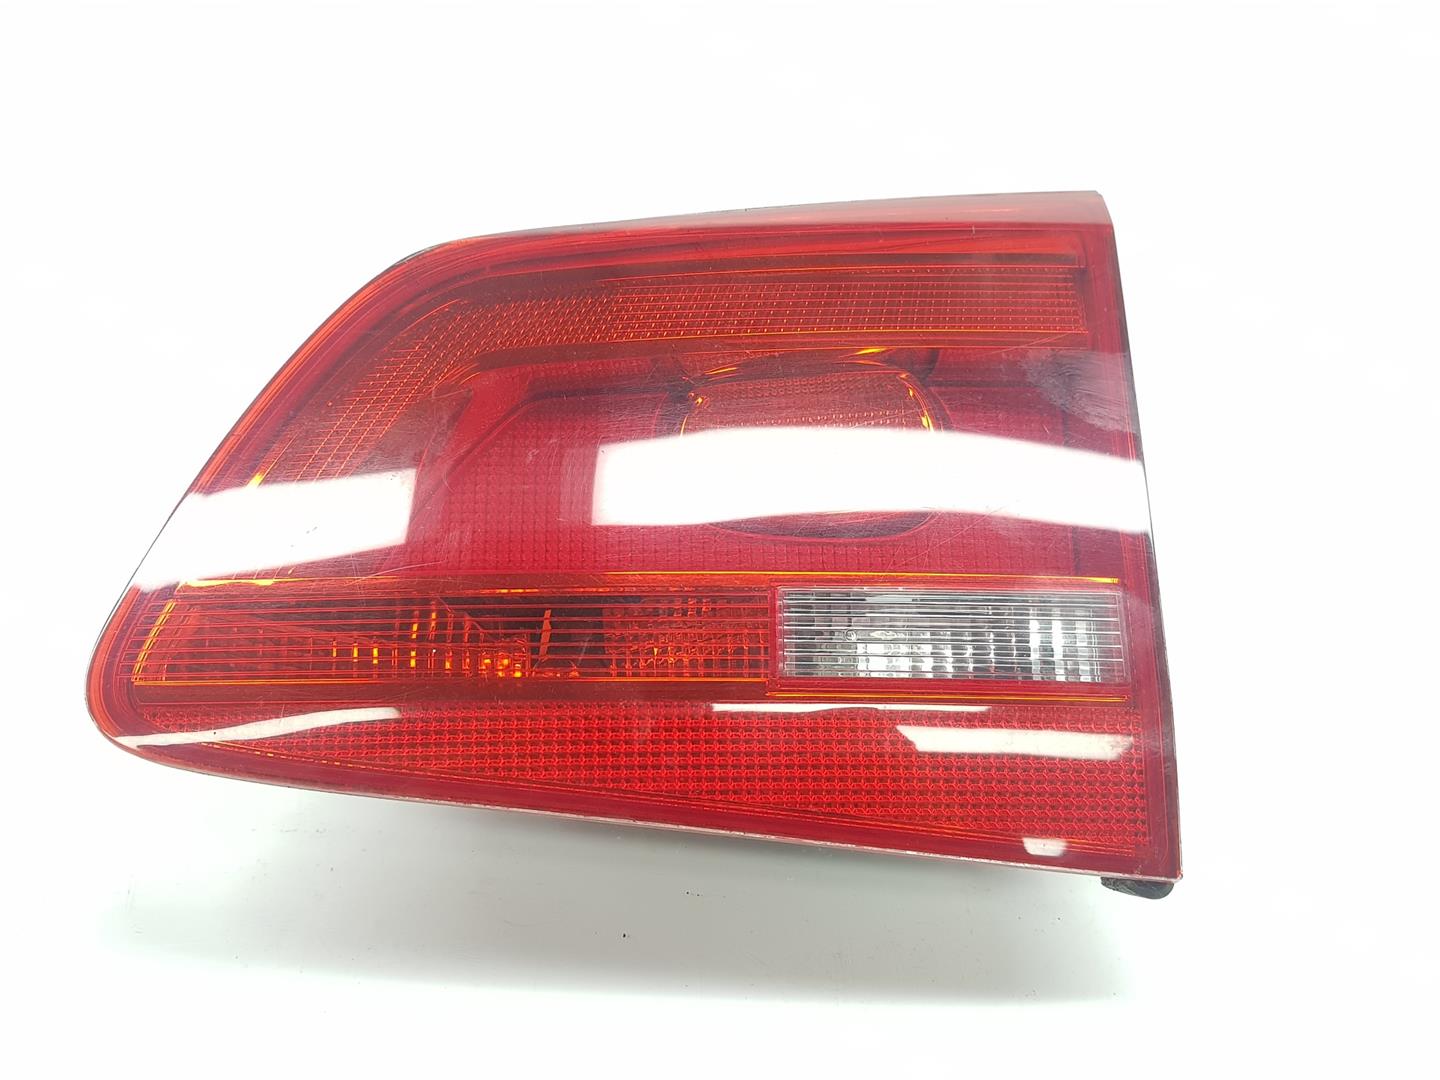 VOLKSWAGEN Touran 1 generation (2003-2015) Rear Right Taillight Lamp 1T0945094A, 1T0945094A 24234798